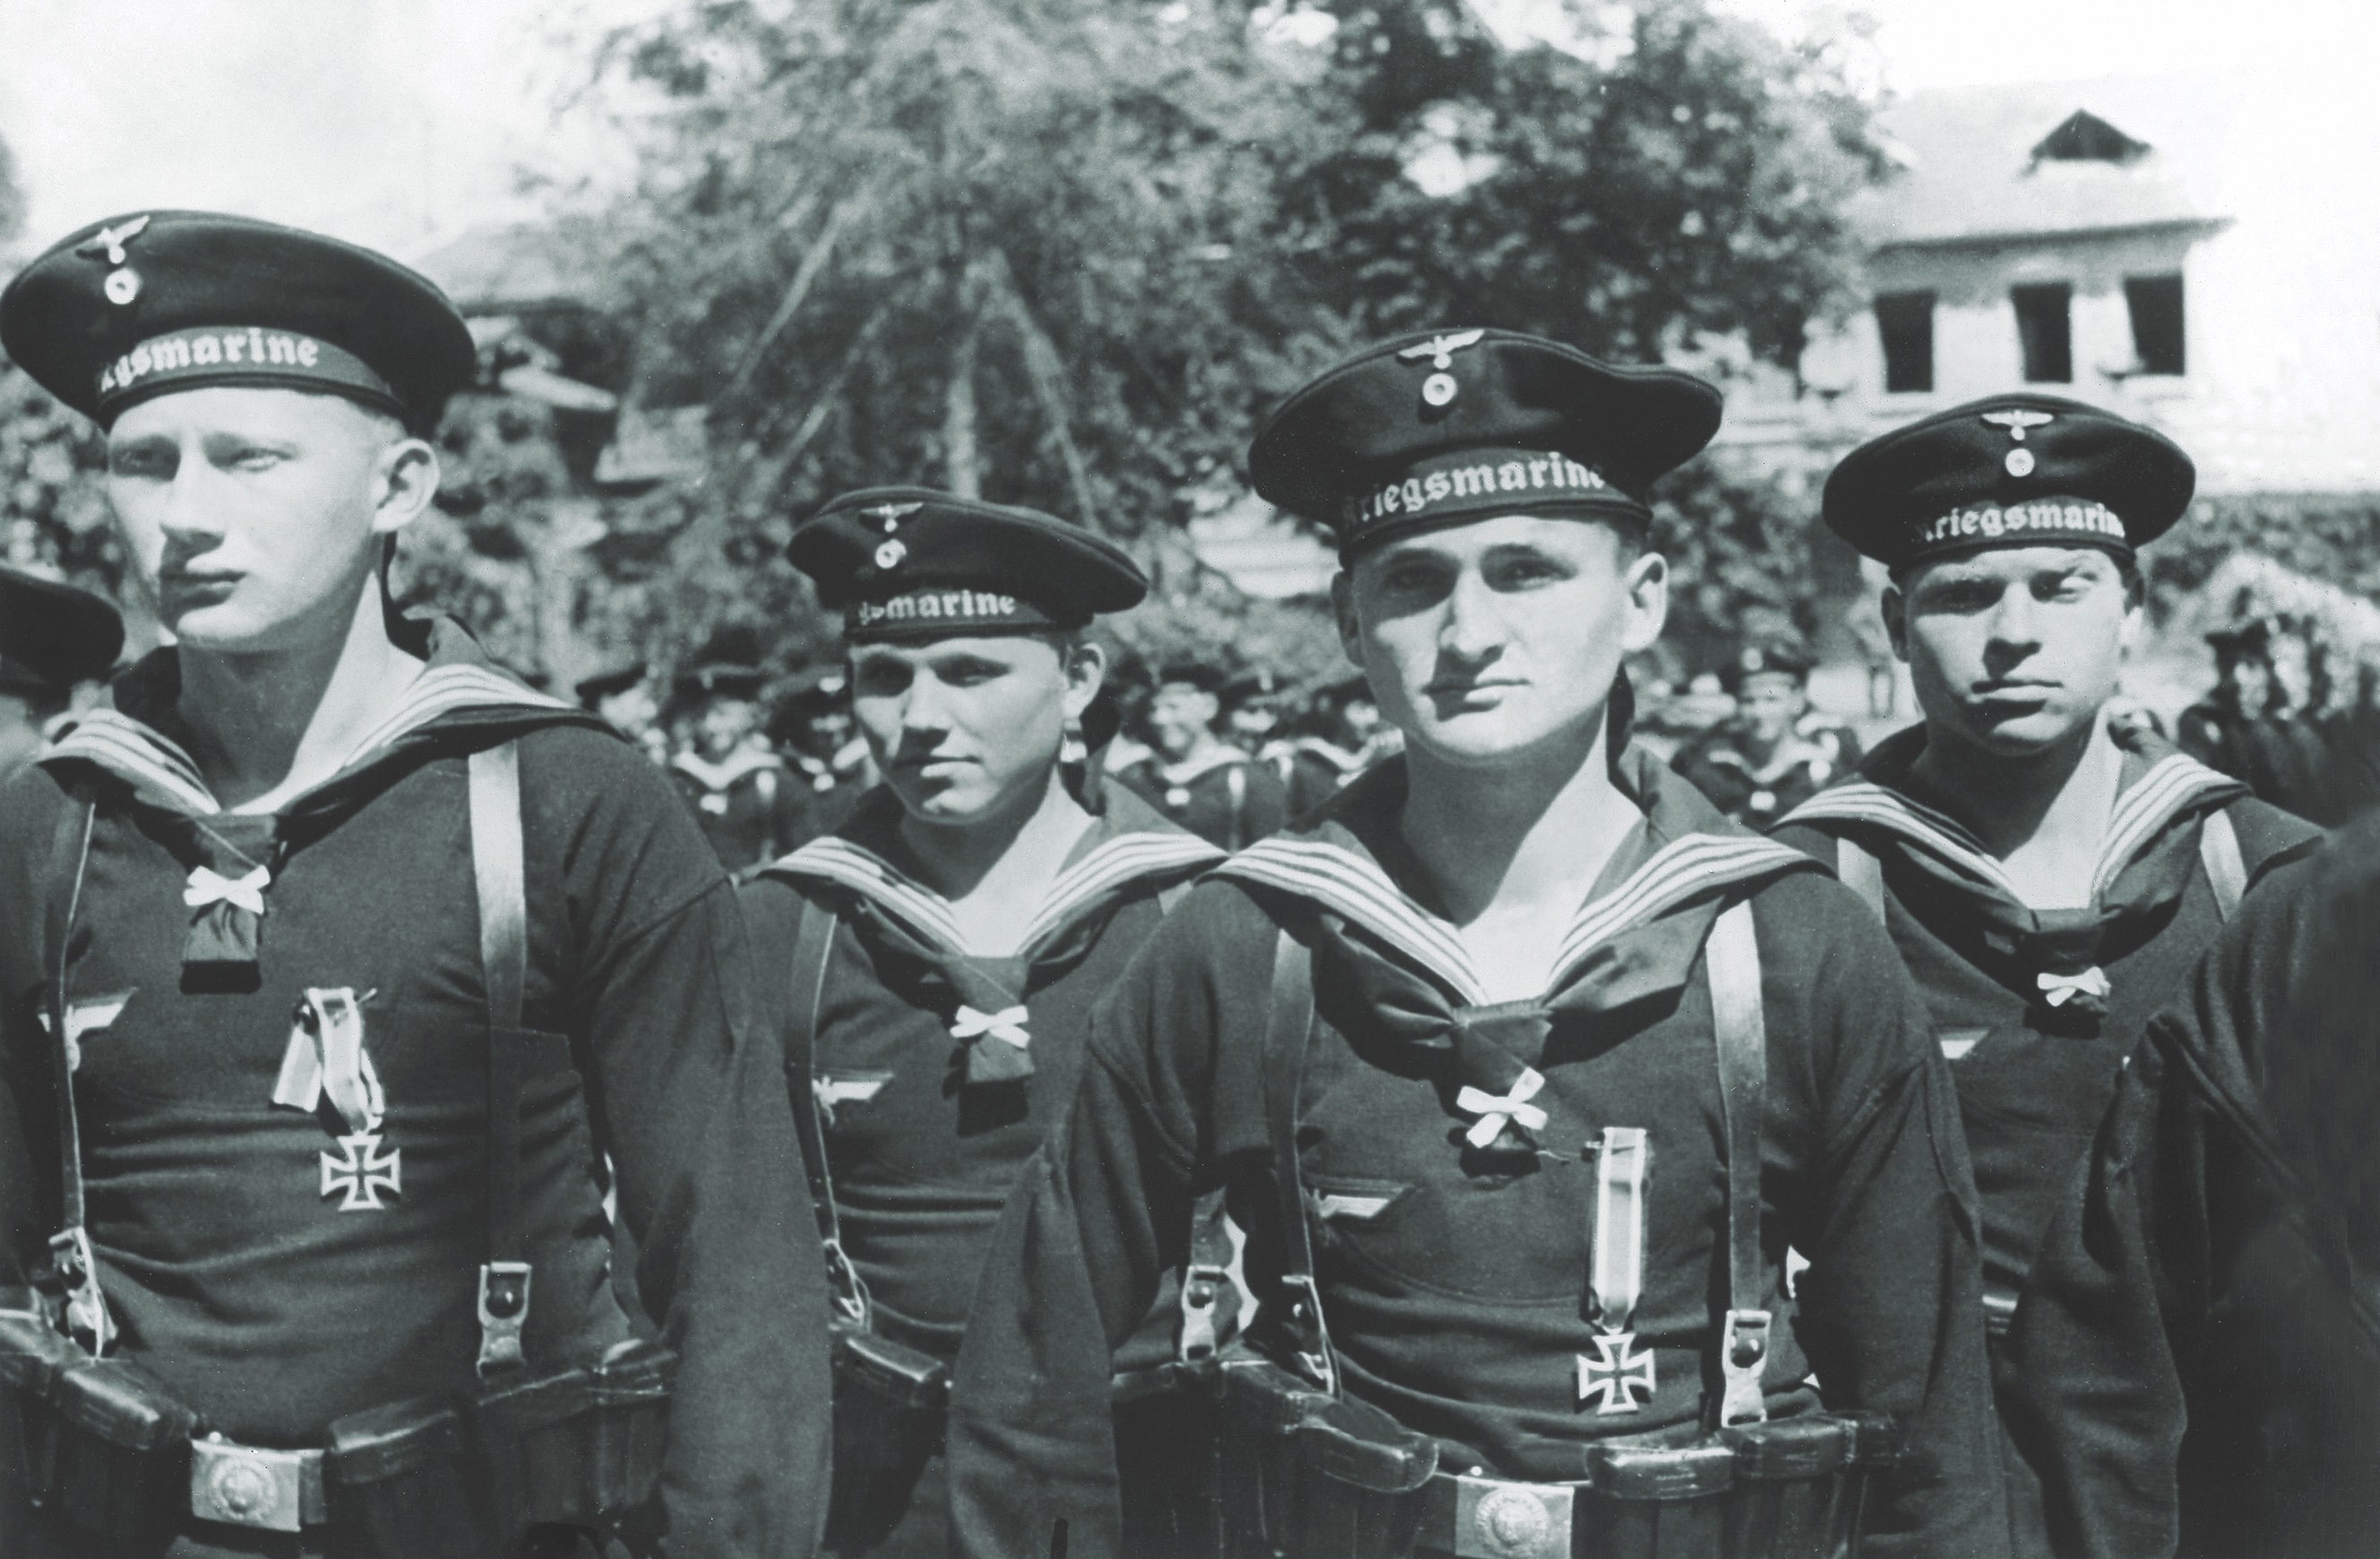 Members of a Kriegsmarine assault detachment stand at attention after the Wehrmacht’s invasion and occupation of the Channel Islands in 1940. (Ullstein Bild DTL/Getty Images) 